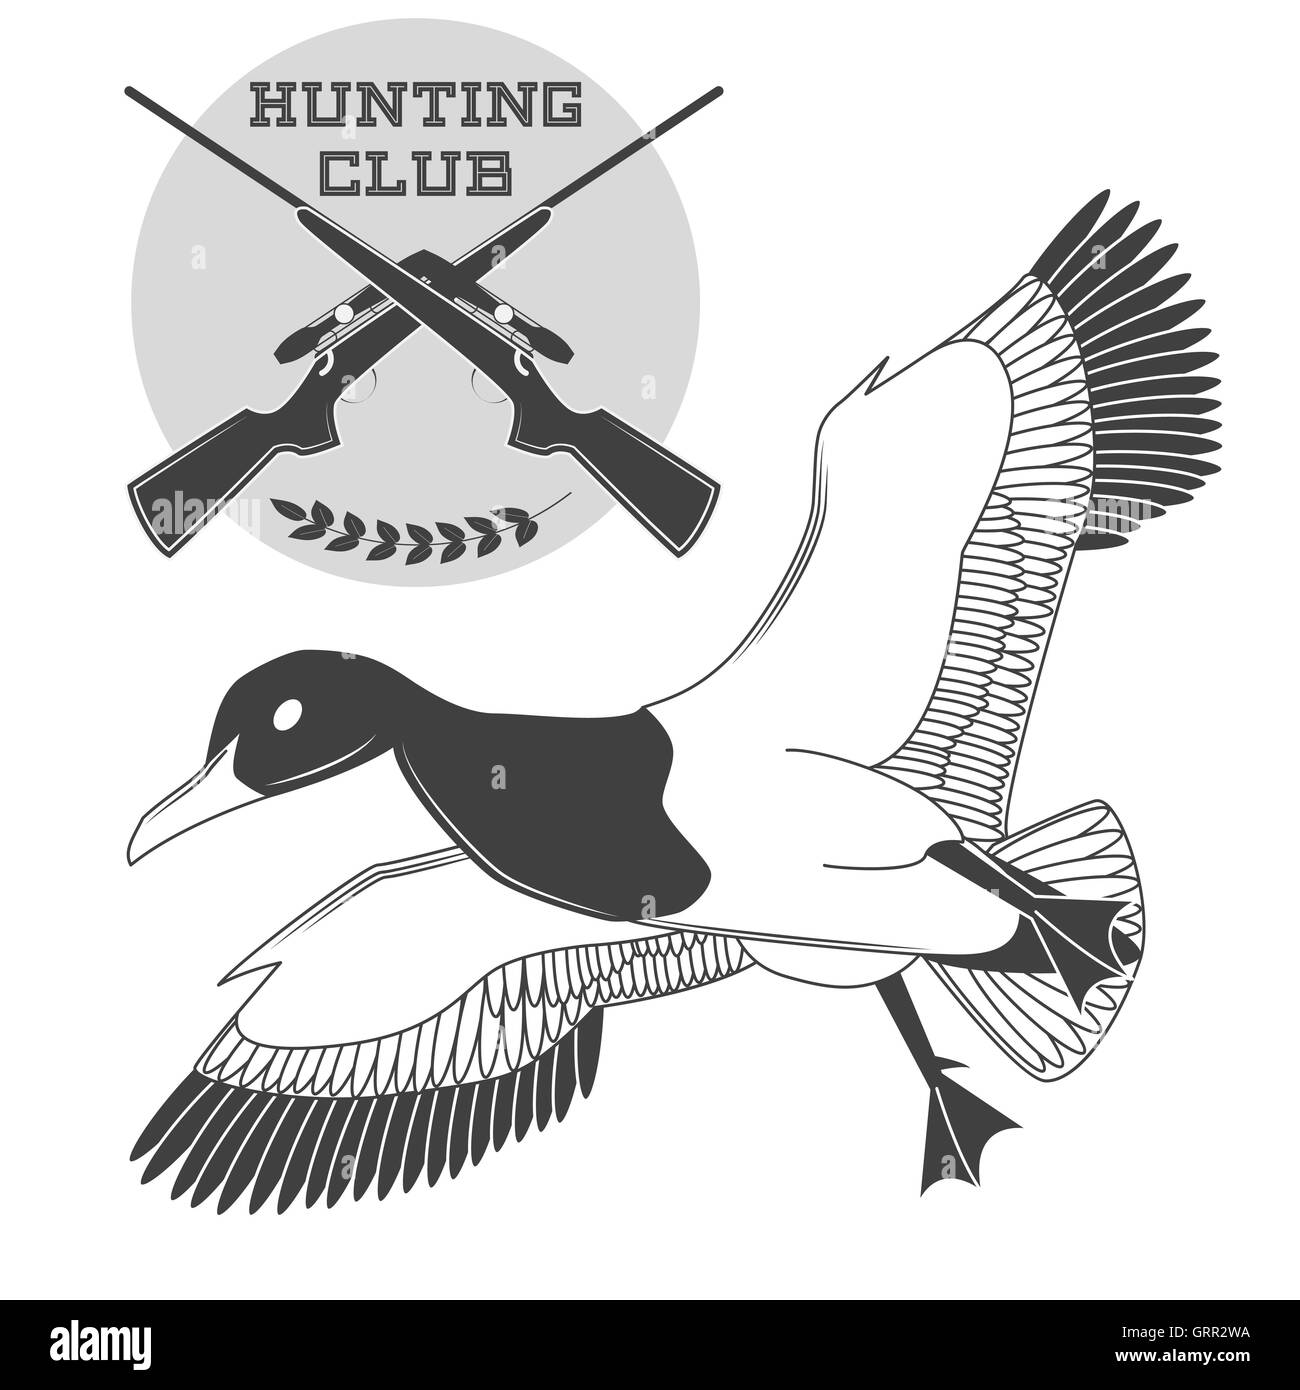 Vintage label with a duck, weapons for lucky hunting club. Vector Stock Vector